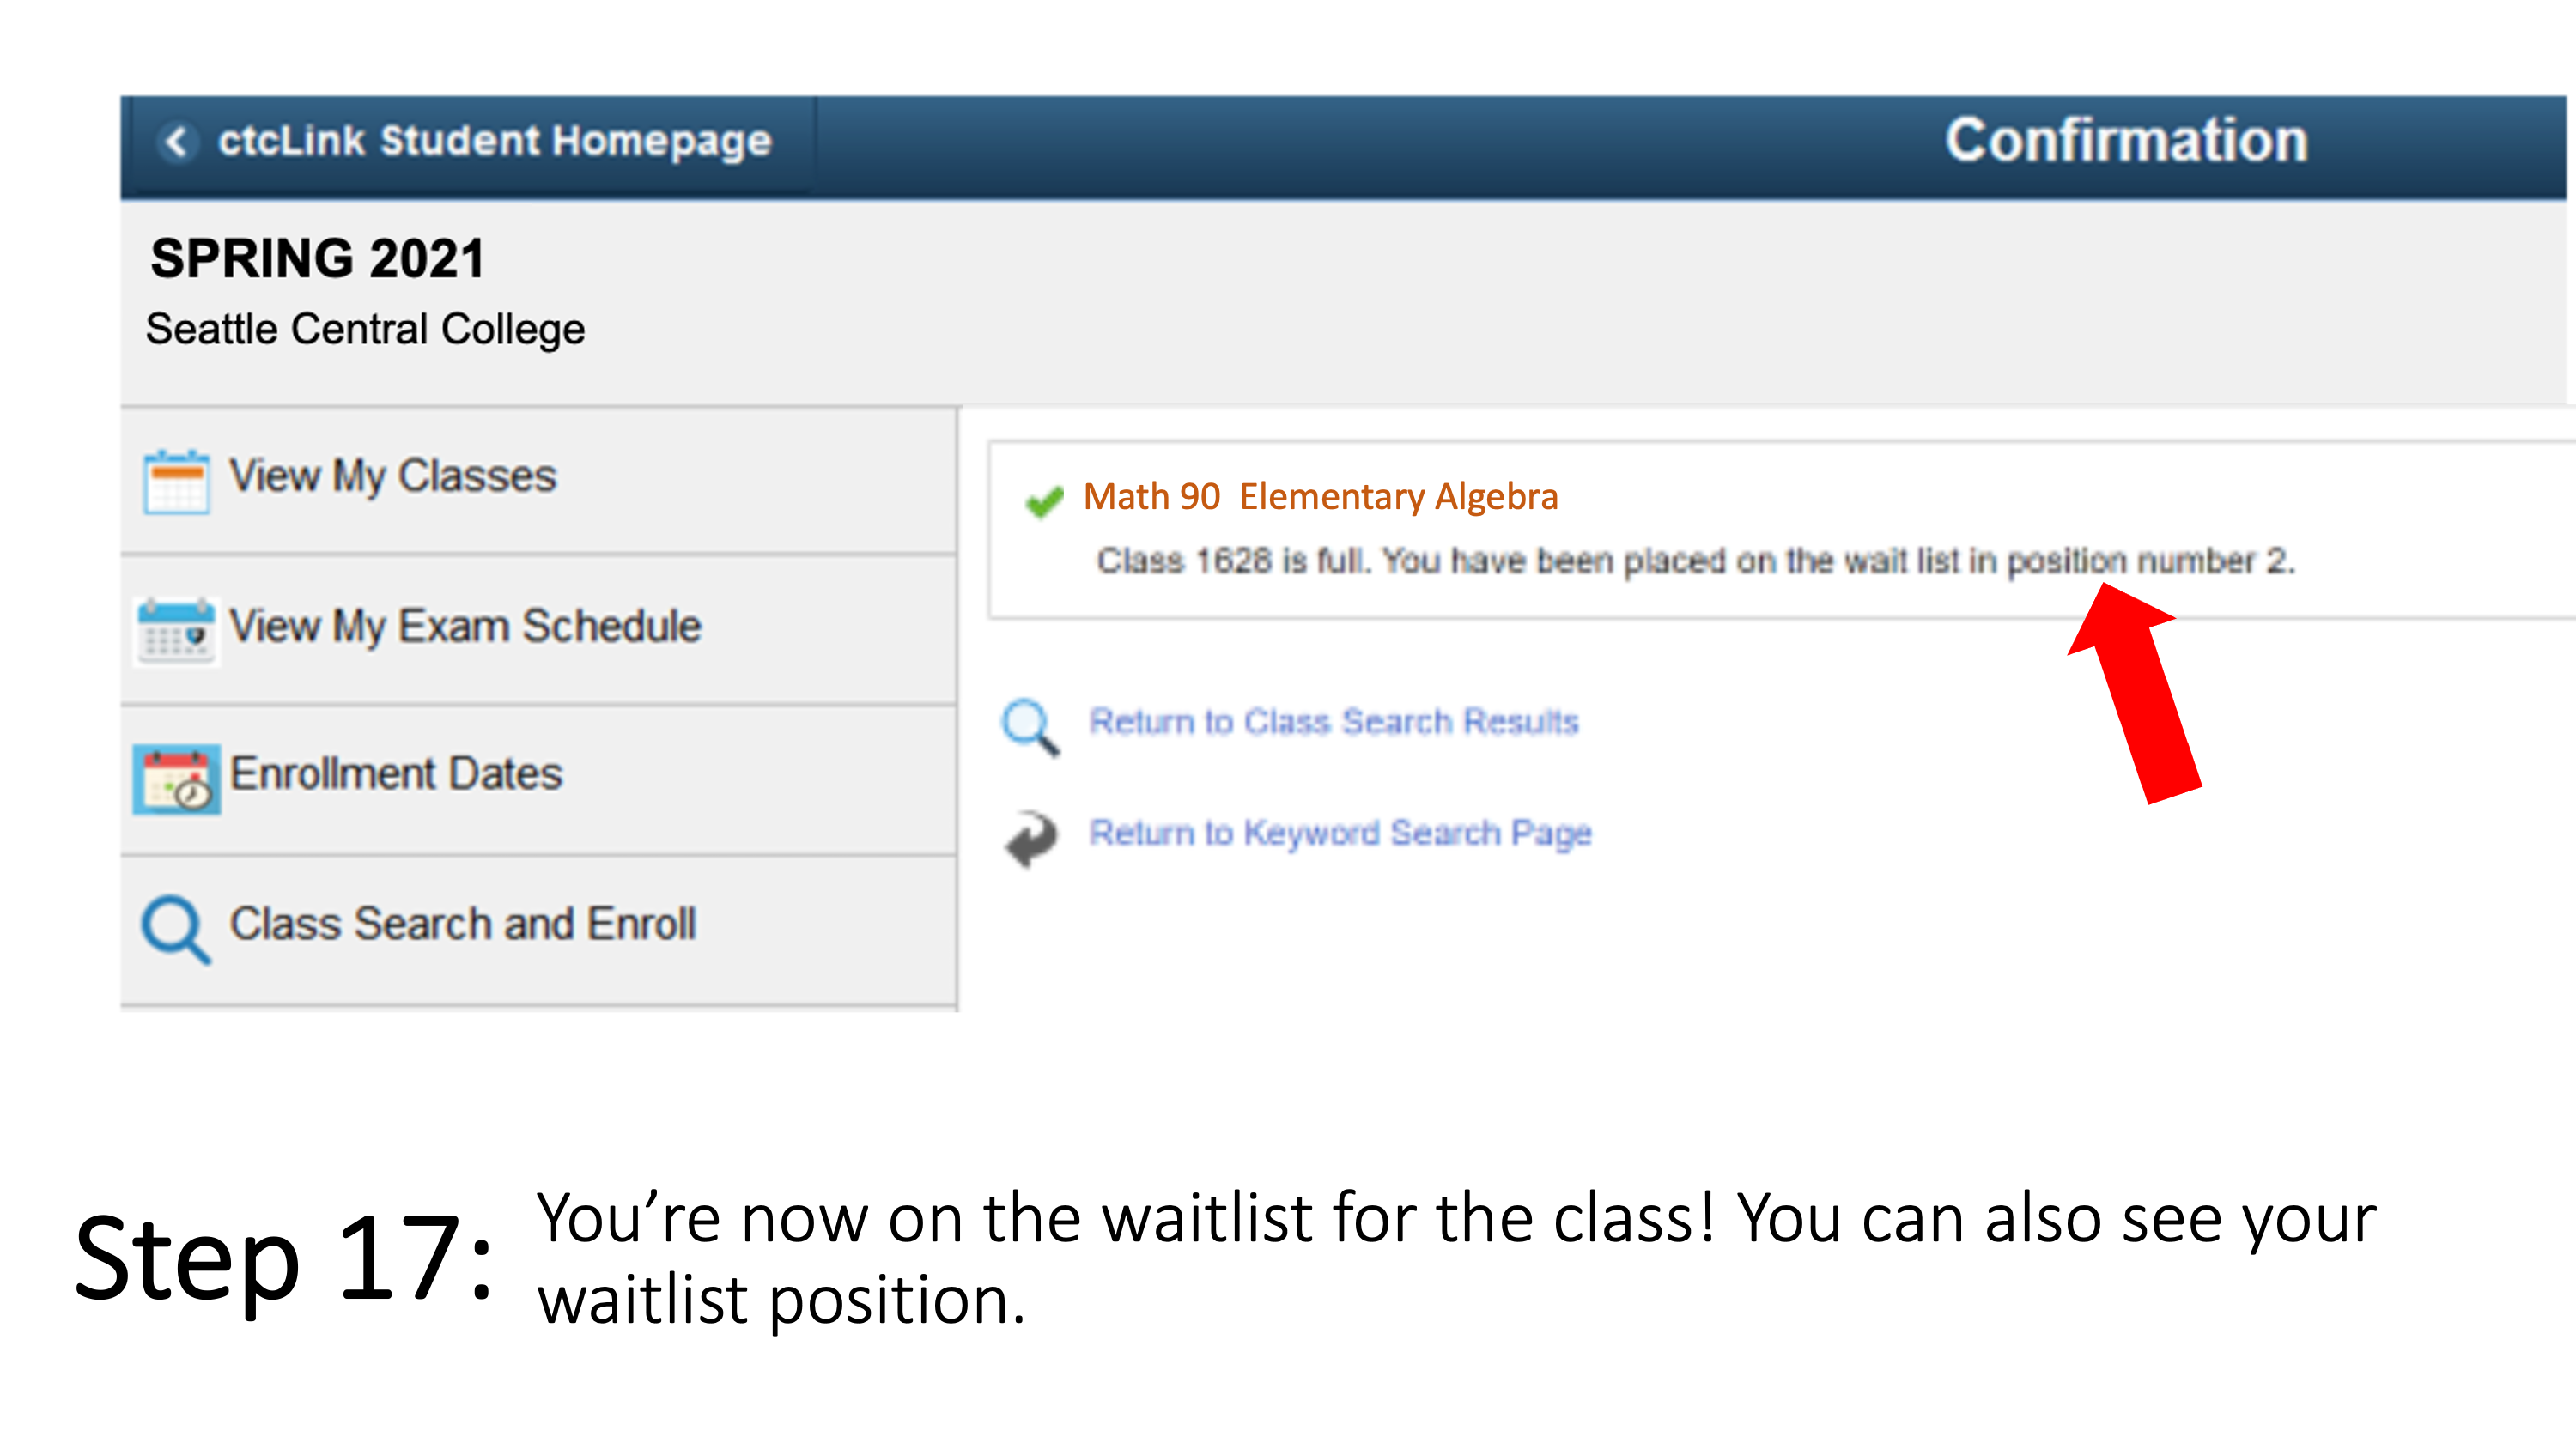 You’re now on the waitlist for the class! You can also see your waitlist position.